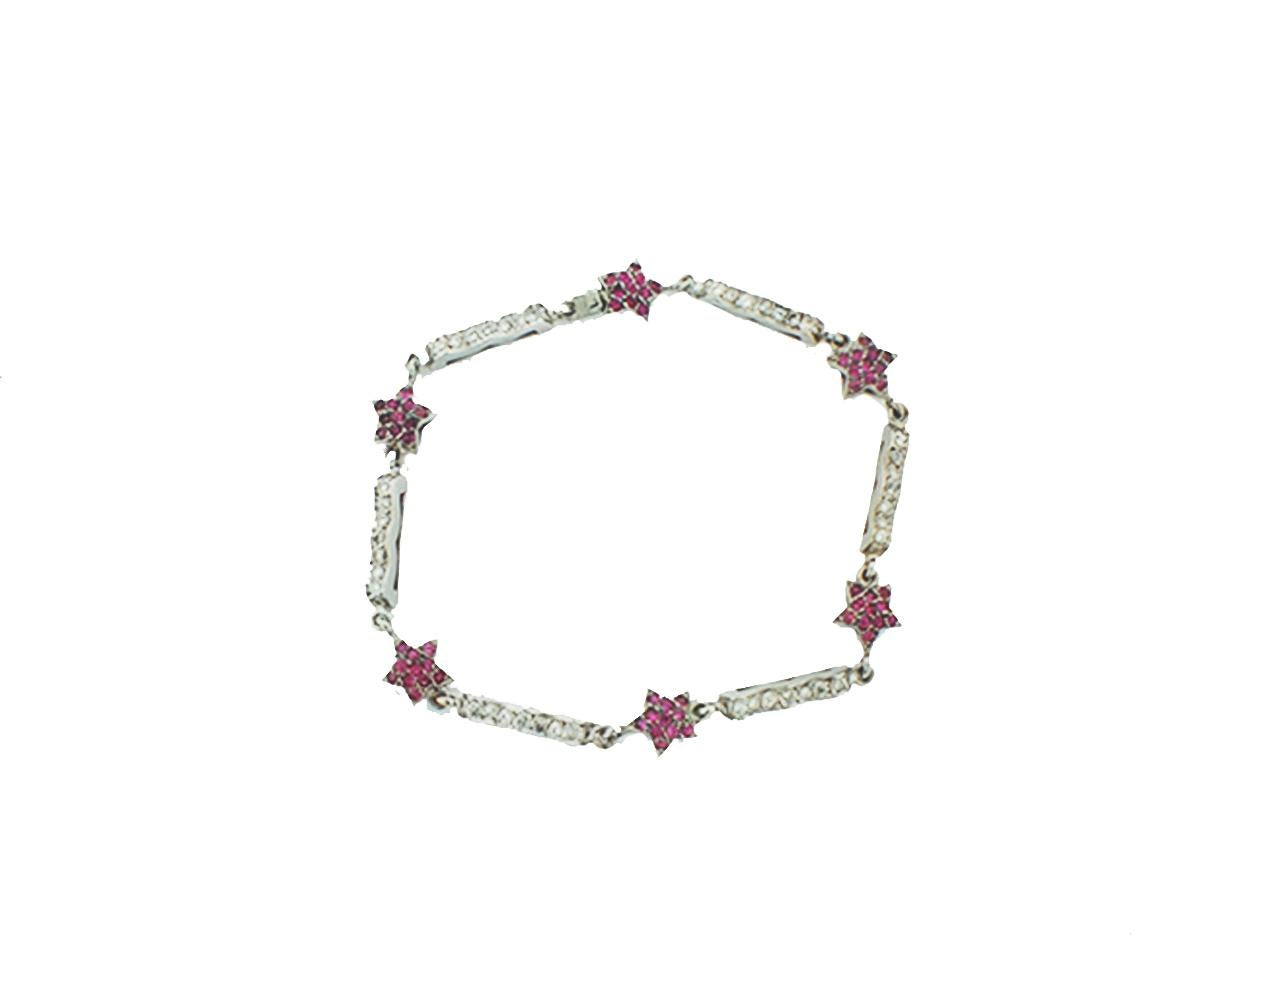 14 karat white gold pink sapphires and diamond tennis bracelet set in shapes of stars bedazzle your wardrobe. The star shaped sapphire links are alternating with links of diamonds set in 14 karat white gold

 The length of the bracelet is 7 inches